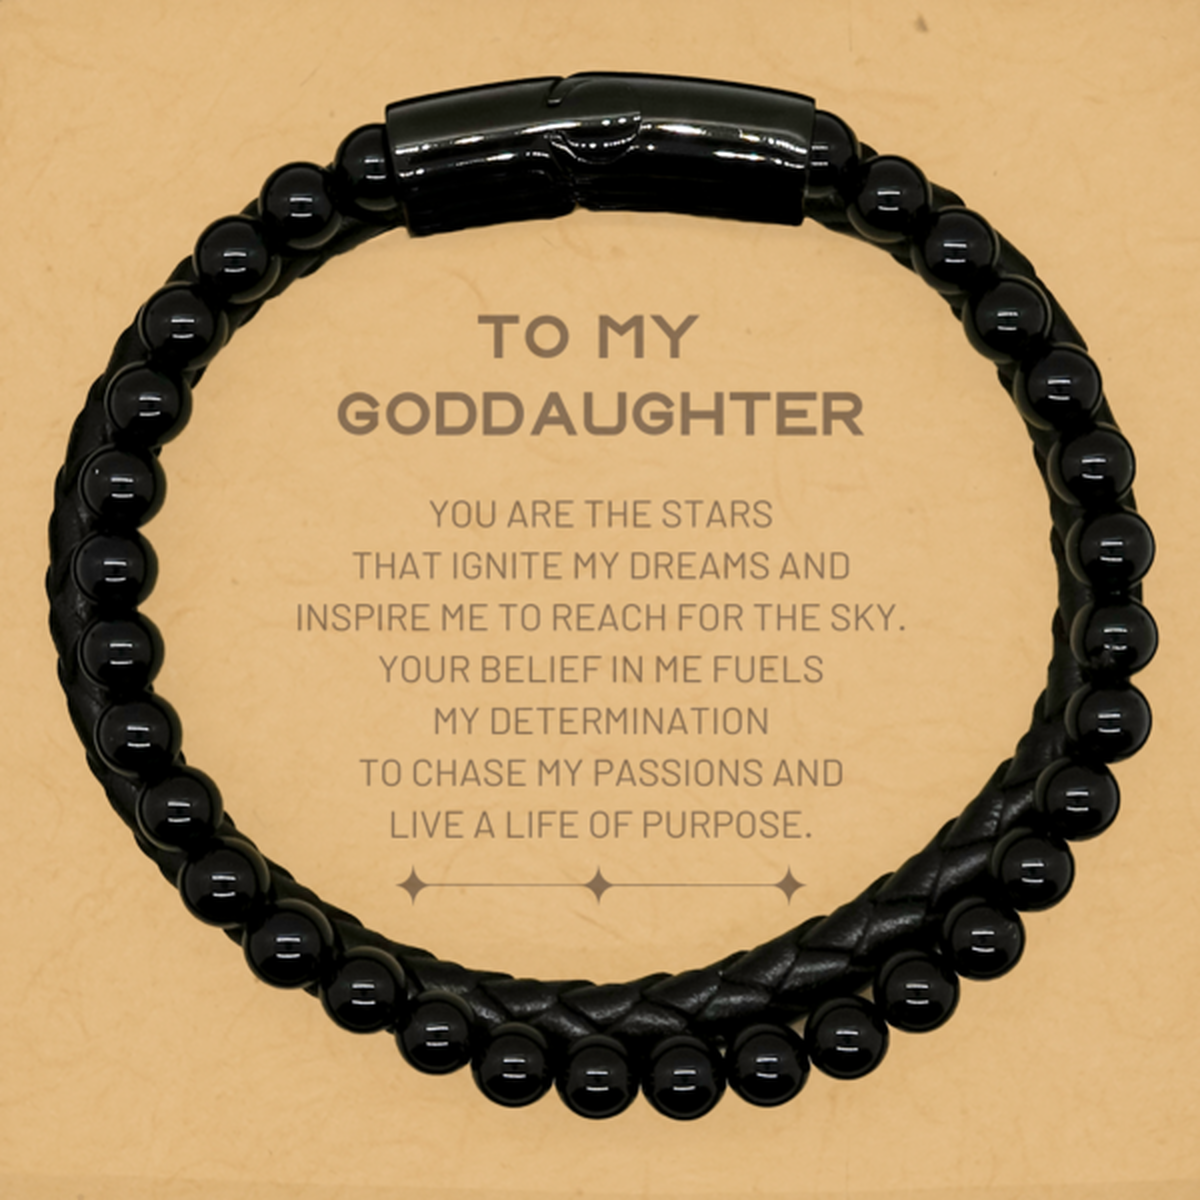 To My Goddaughter Stone Leather Bracelets, You are the stars that ignite my dreams and inspire me to reach for the sky, Birthday Unique Gifts For Goddaughter, Thank You Gifts For Goddaughter